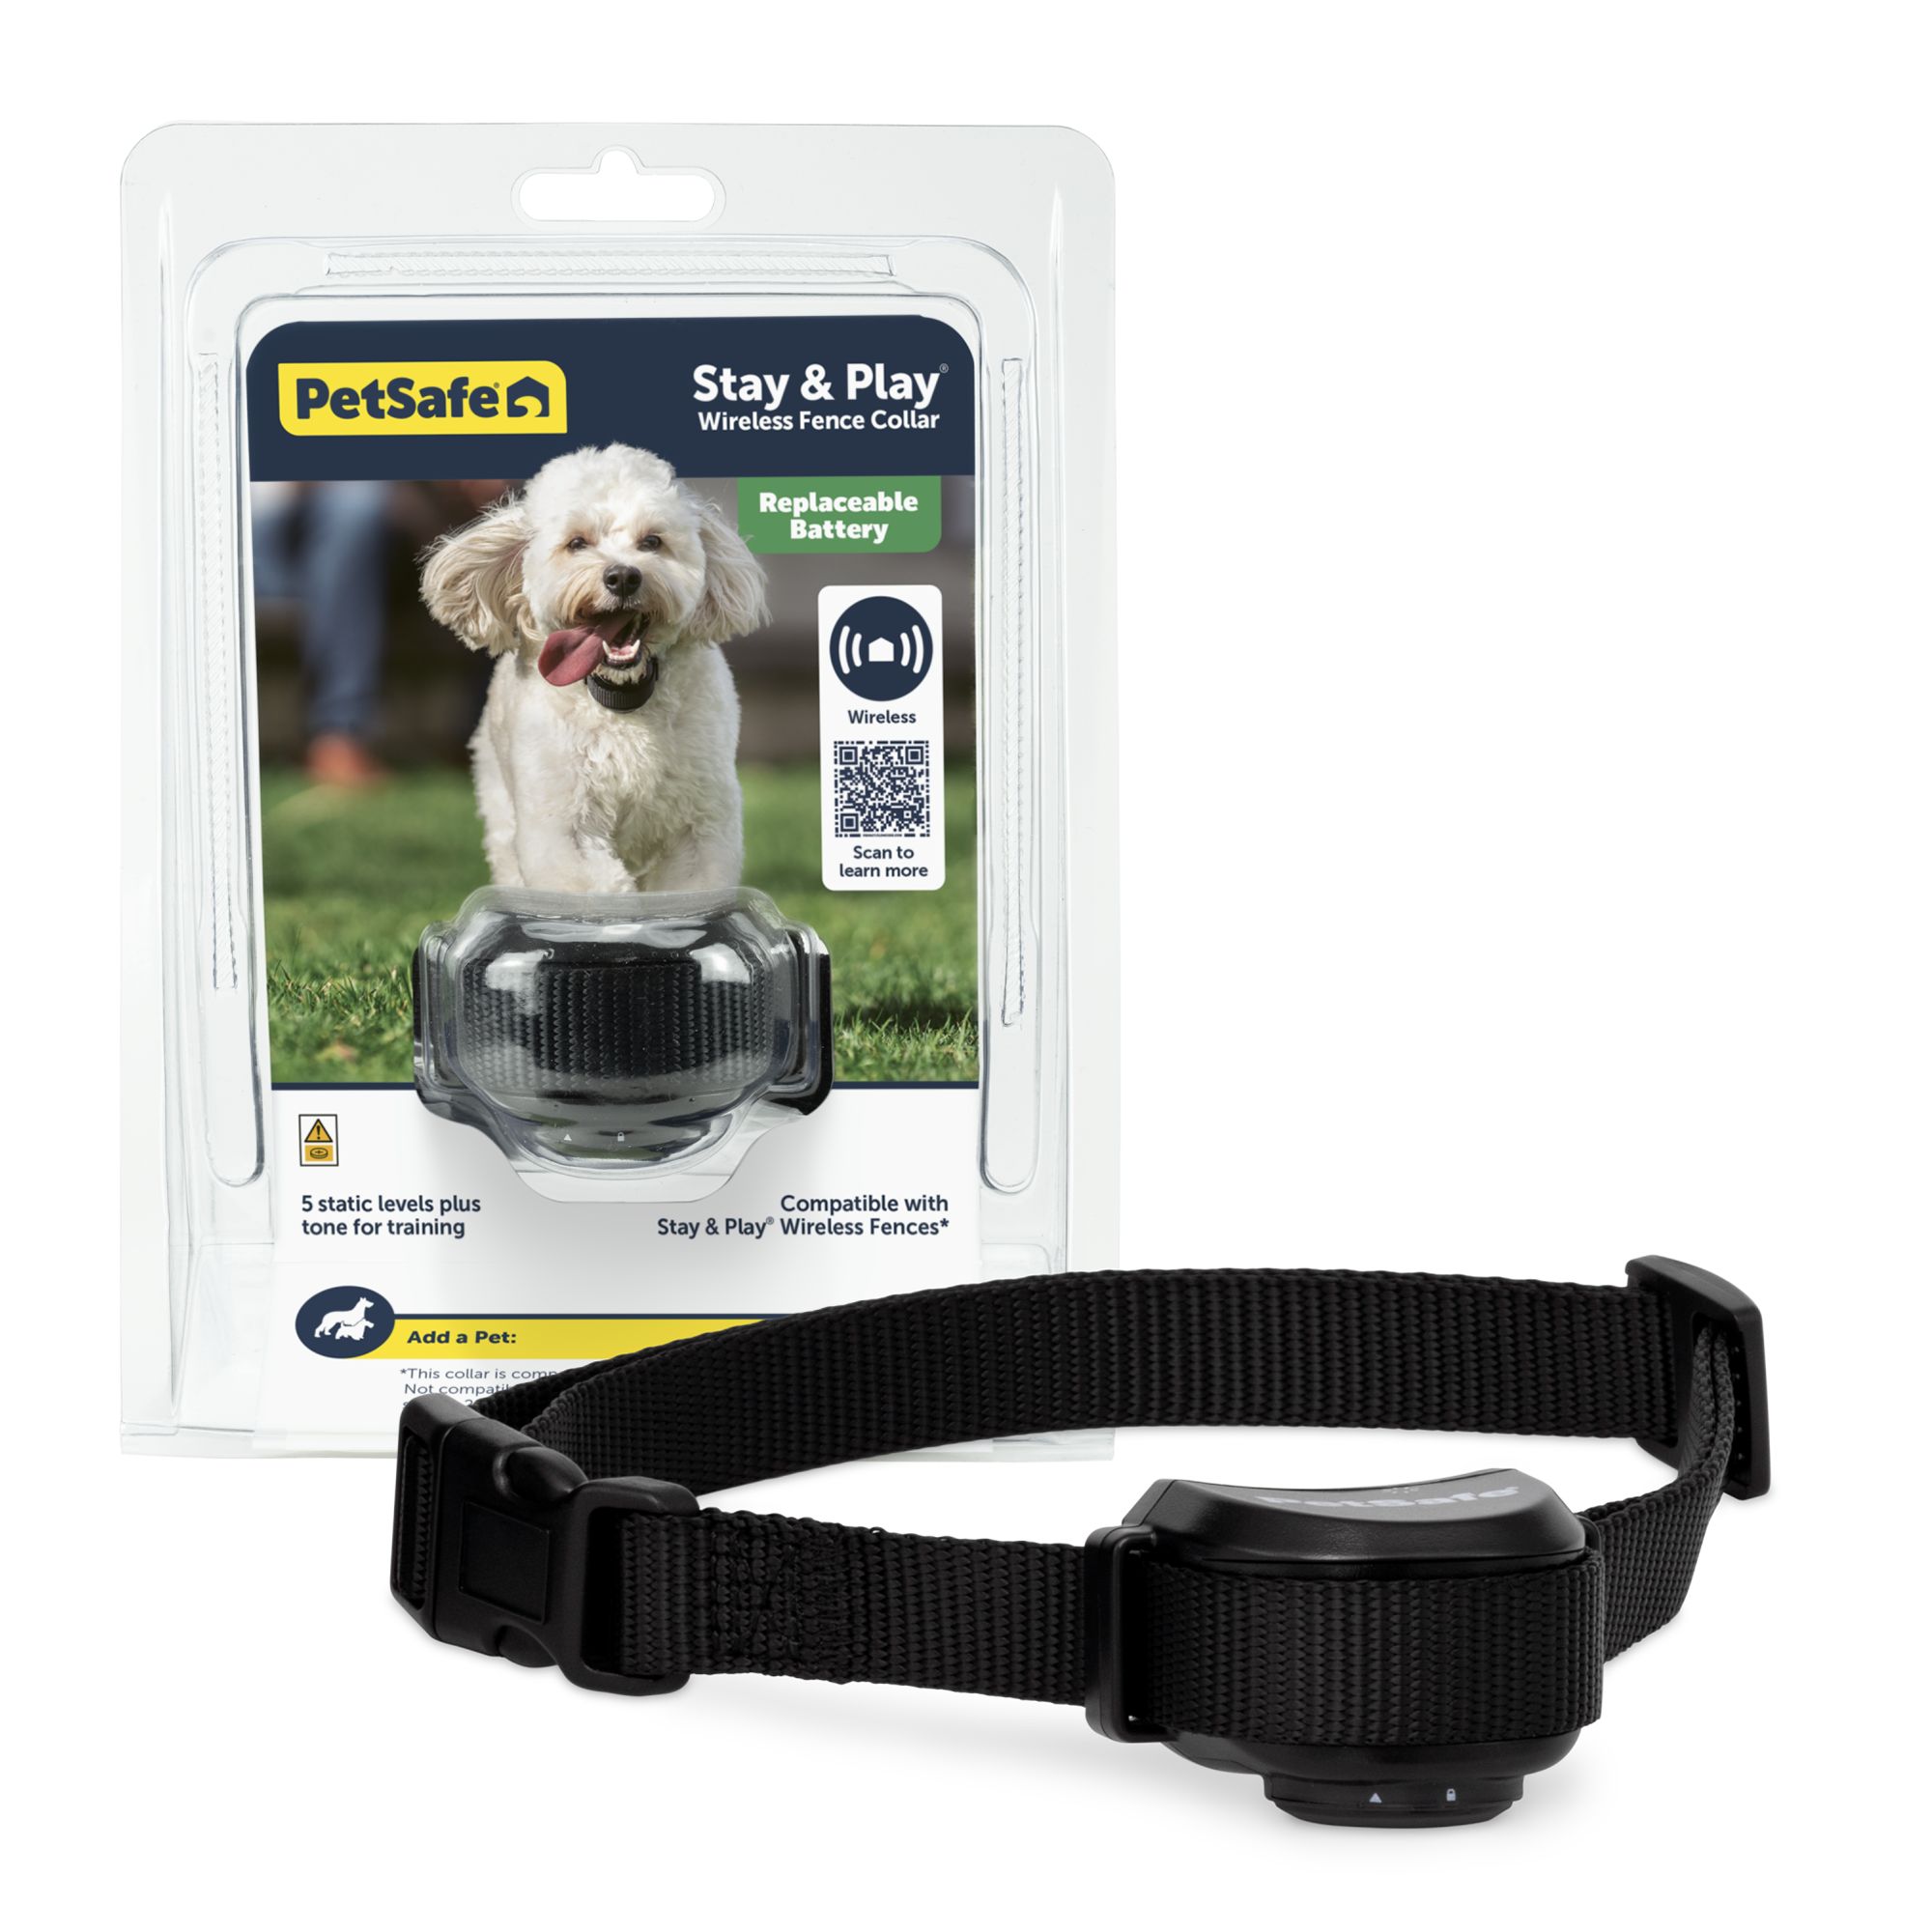 PetSafe Stay & Play Wireless Fence with Replaceable Battery Collar for Dogs